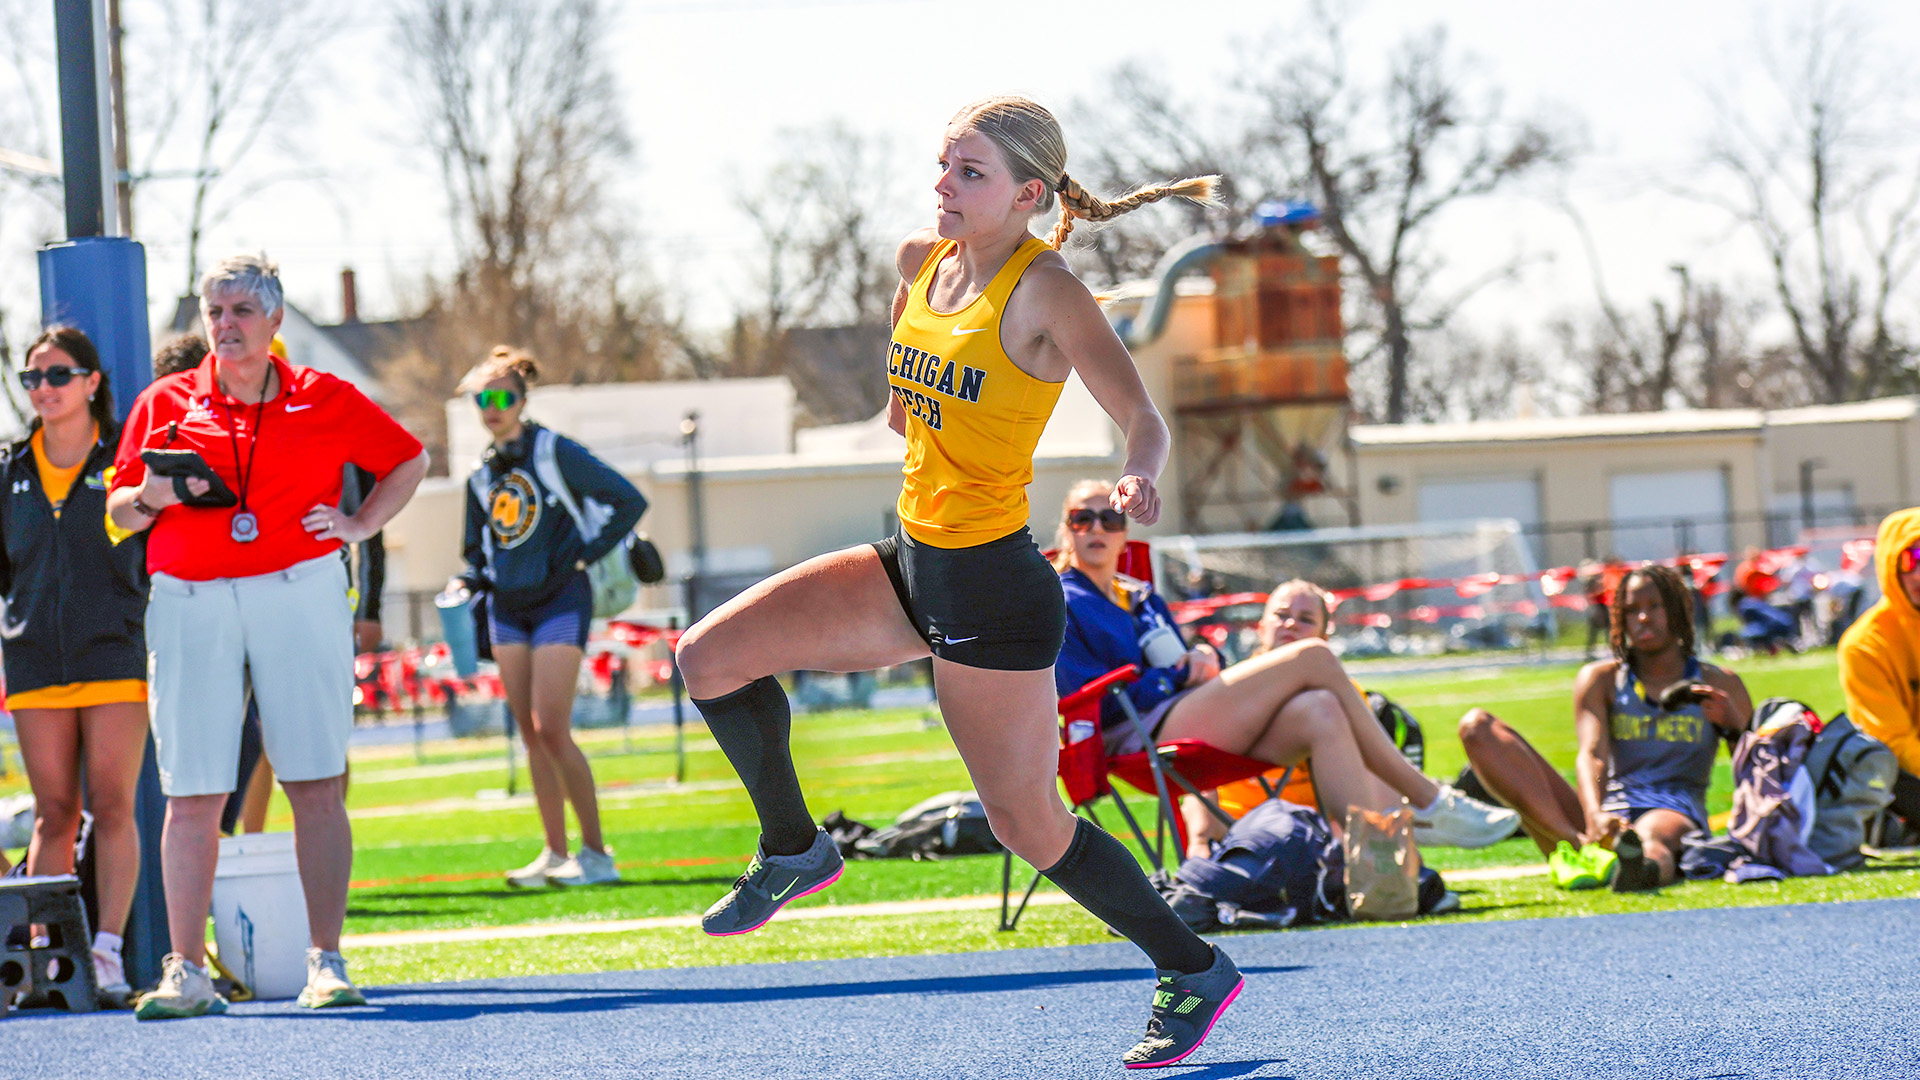 Tech T&F to Compete at Phil Esten Challenge this Weekend